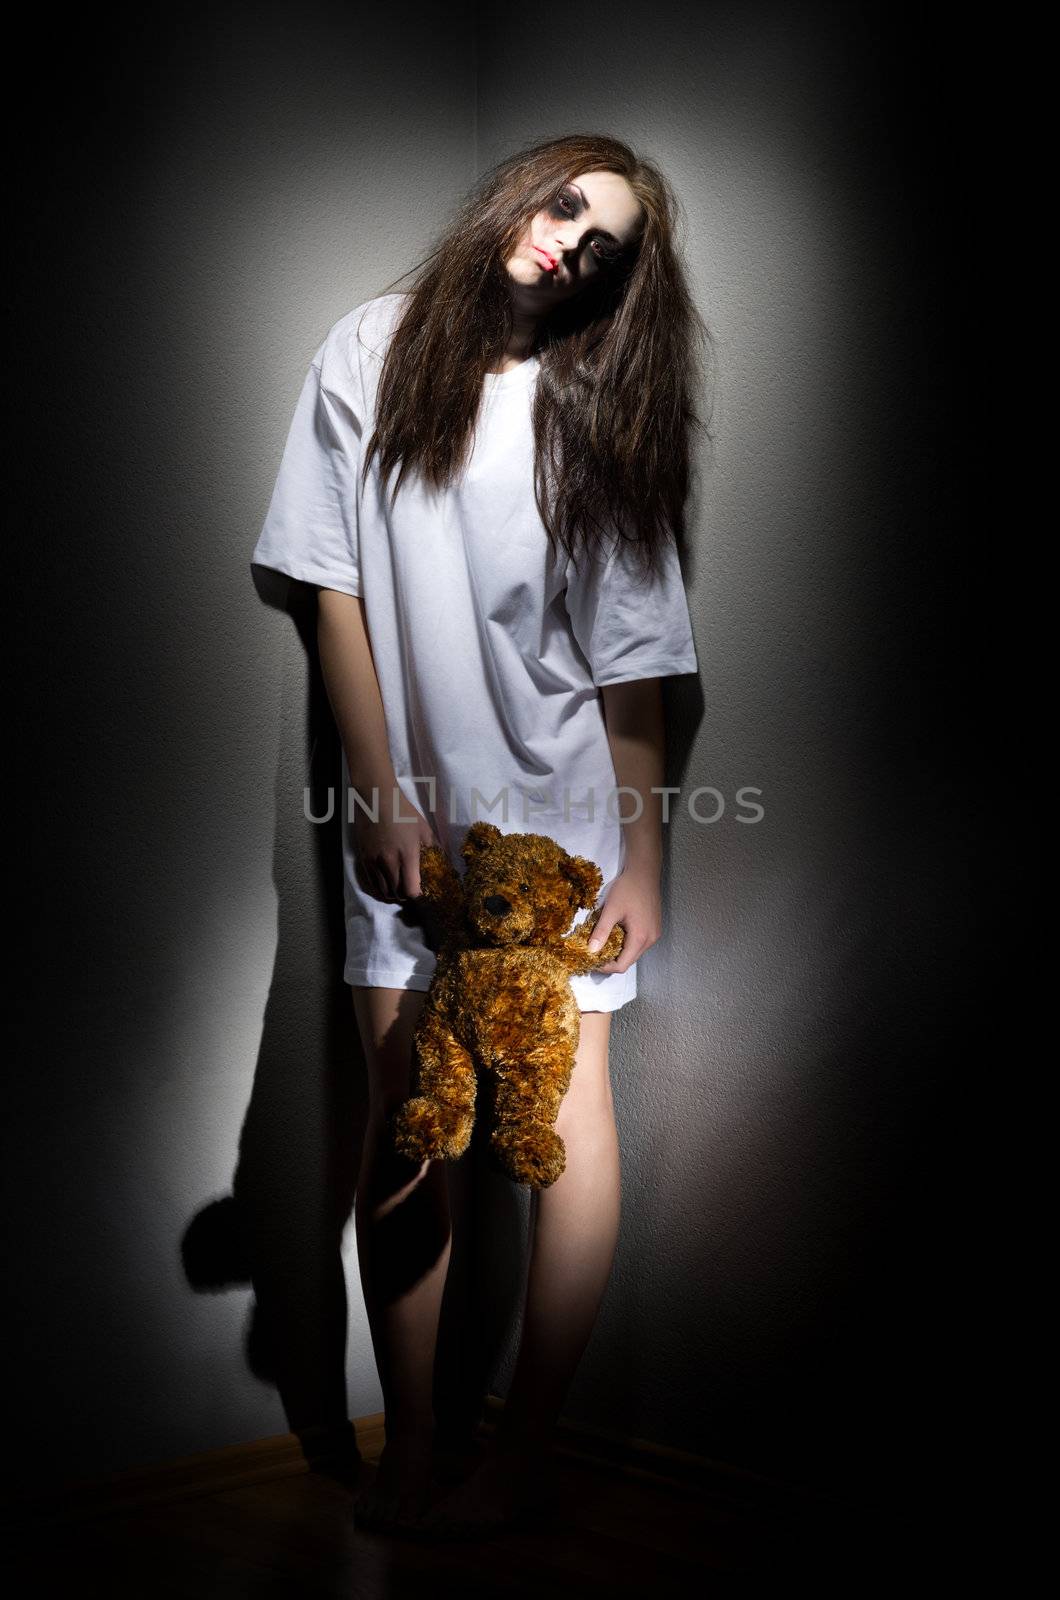 Zombie girl with teddy bear by rbv